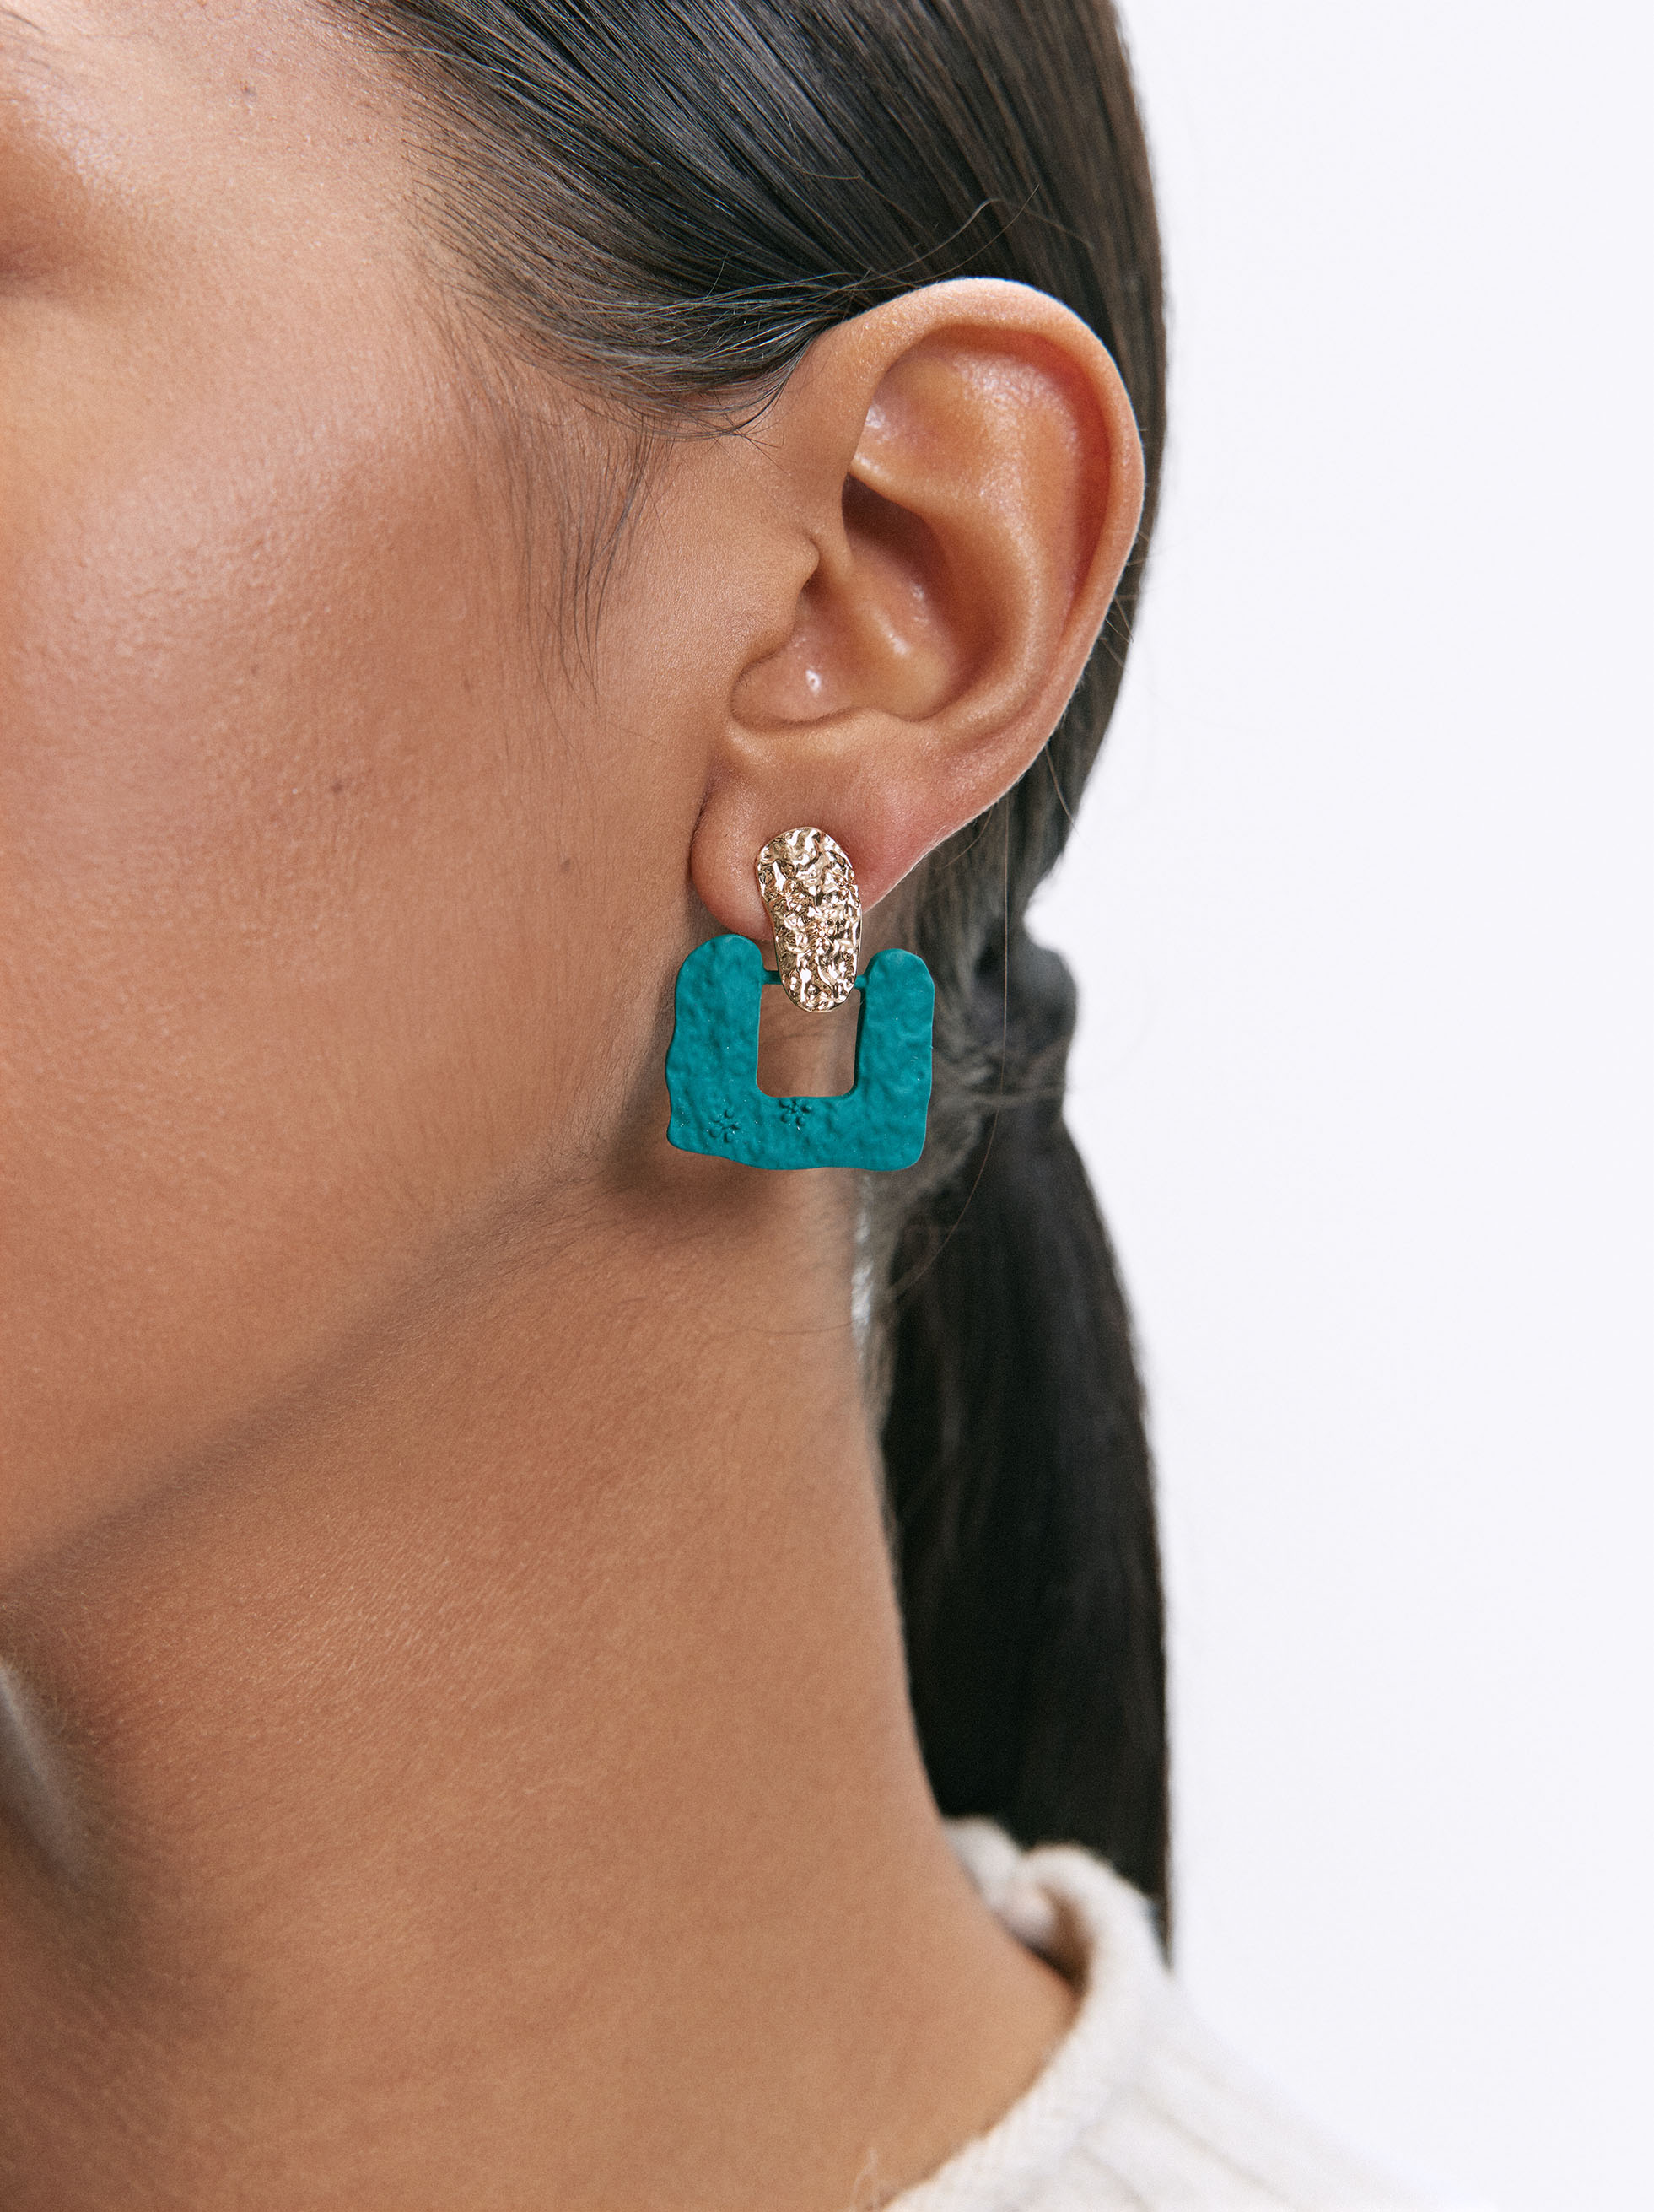 Earrings With Matte Effect image number 1.0